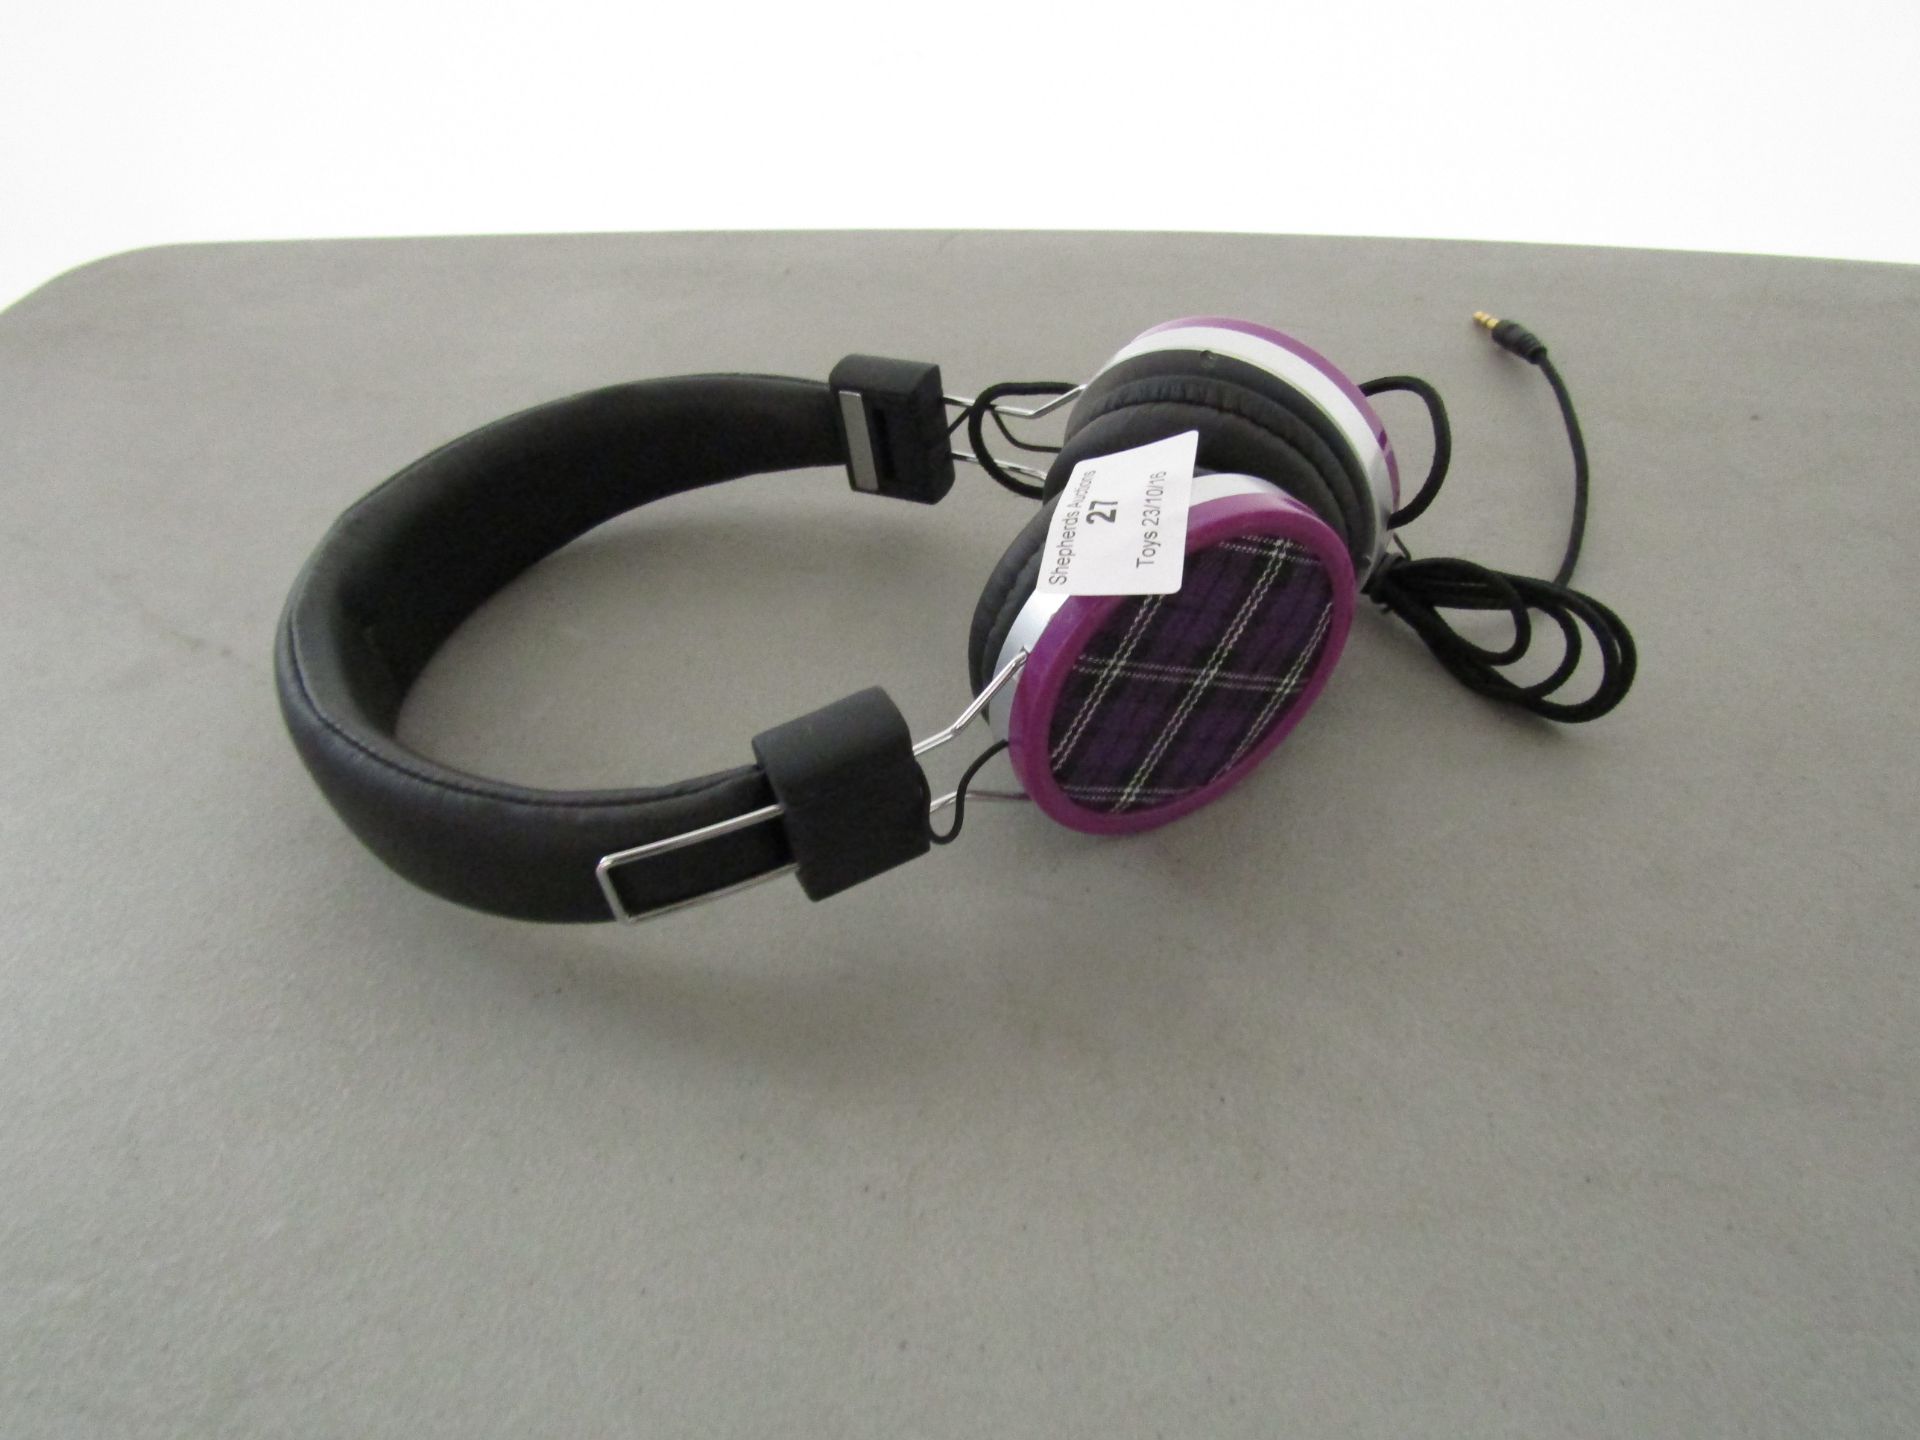 Purple colour headphones, tested working and new (ex display).